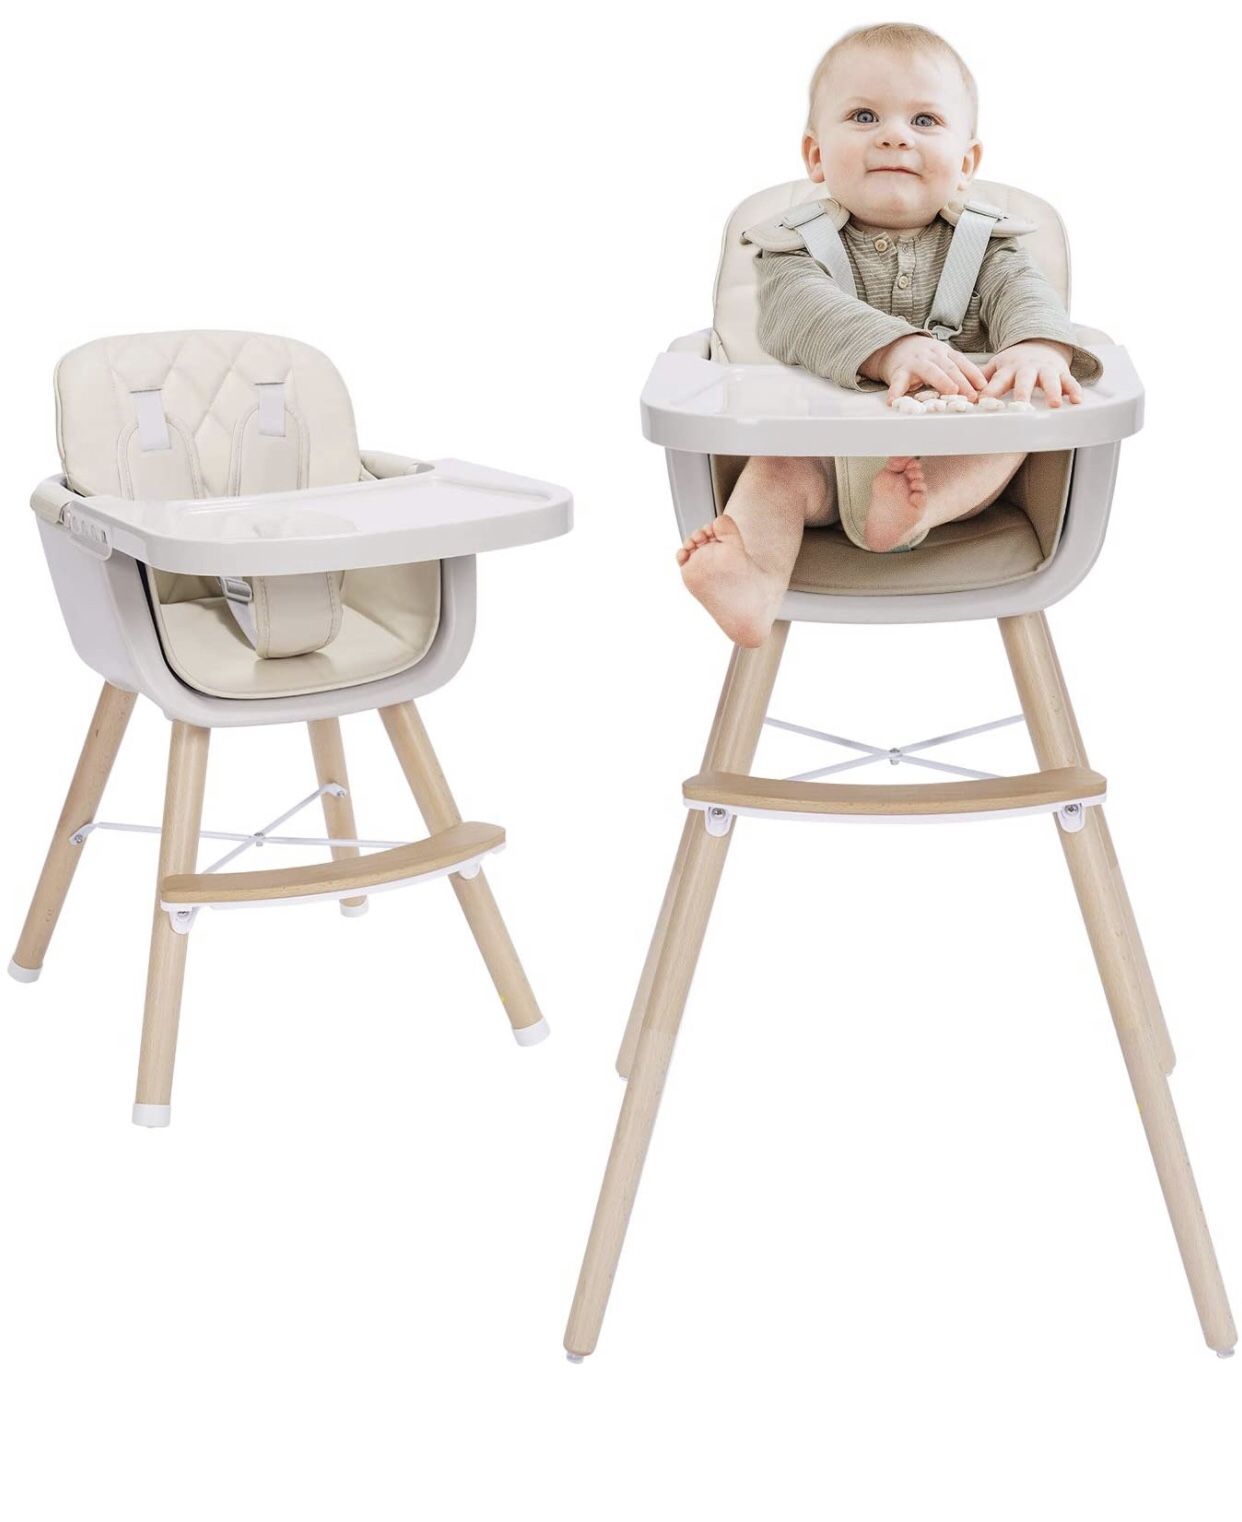 3-in-1 Baby High Chair with Adjustable Legs, Tray -Cream Color, Wooden High Chair , NEW